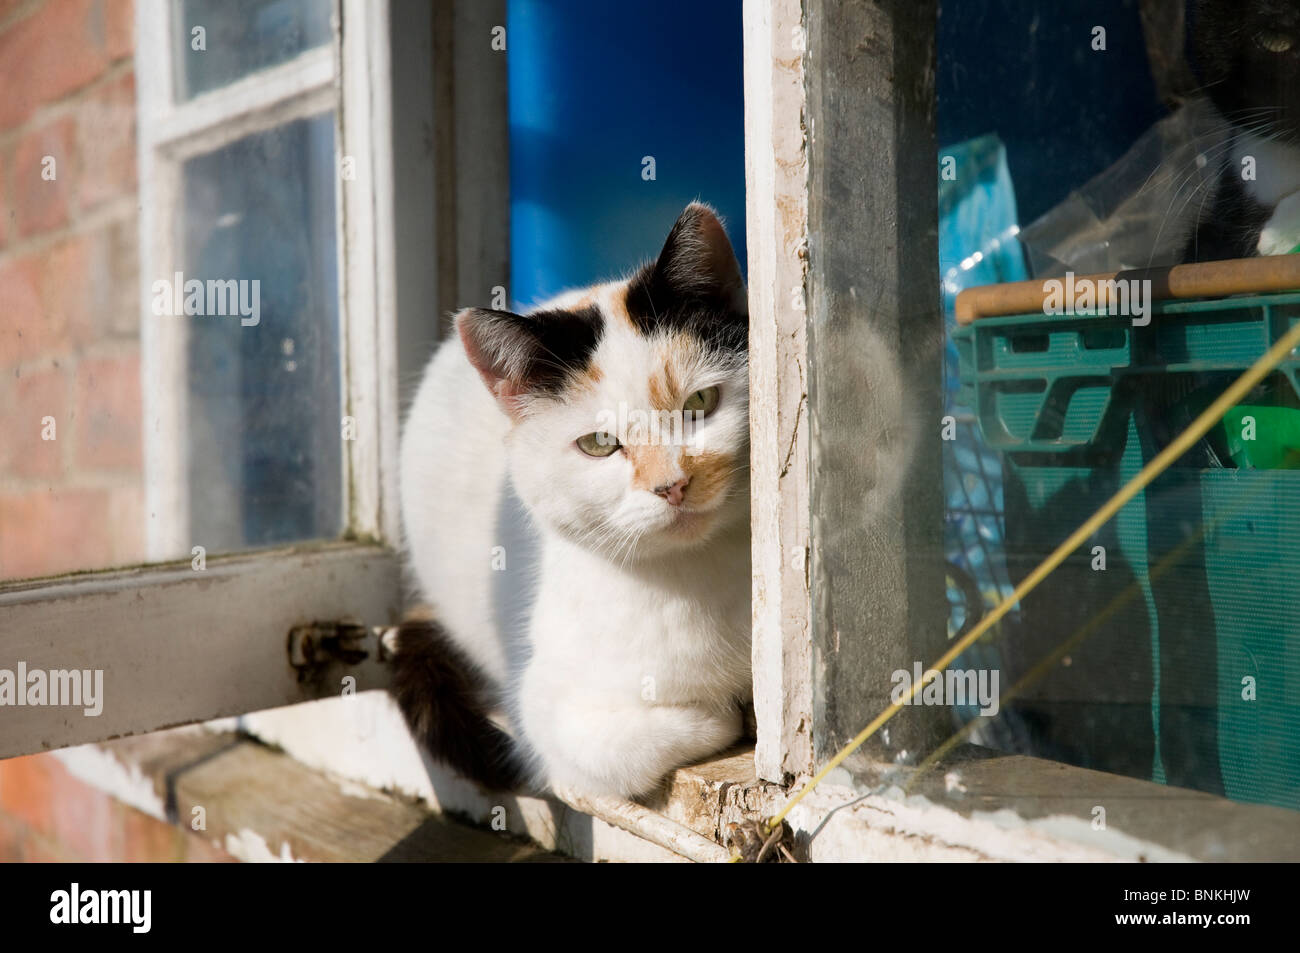 A cat looks out of the window of a farm building Stock Photo